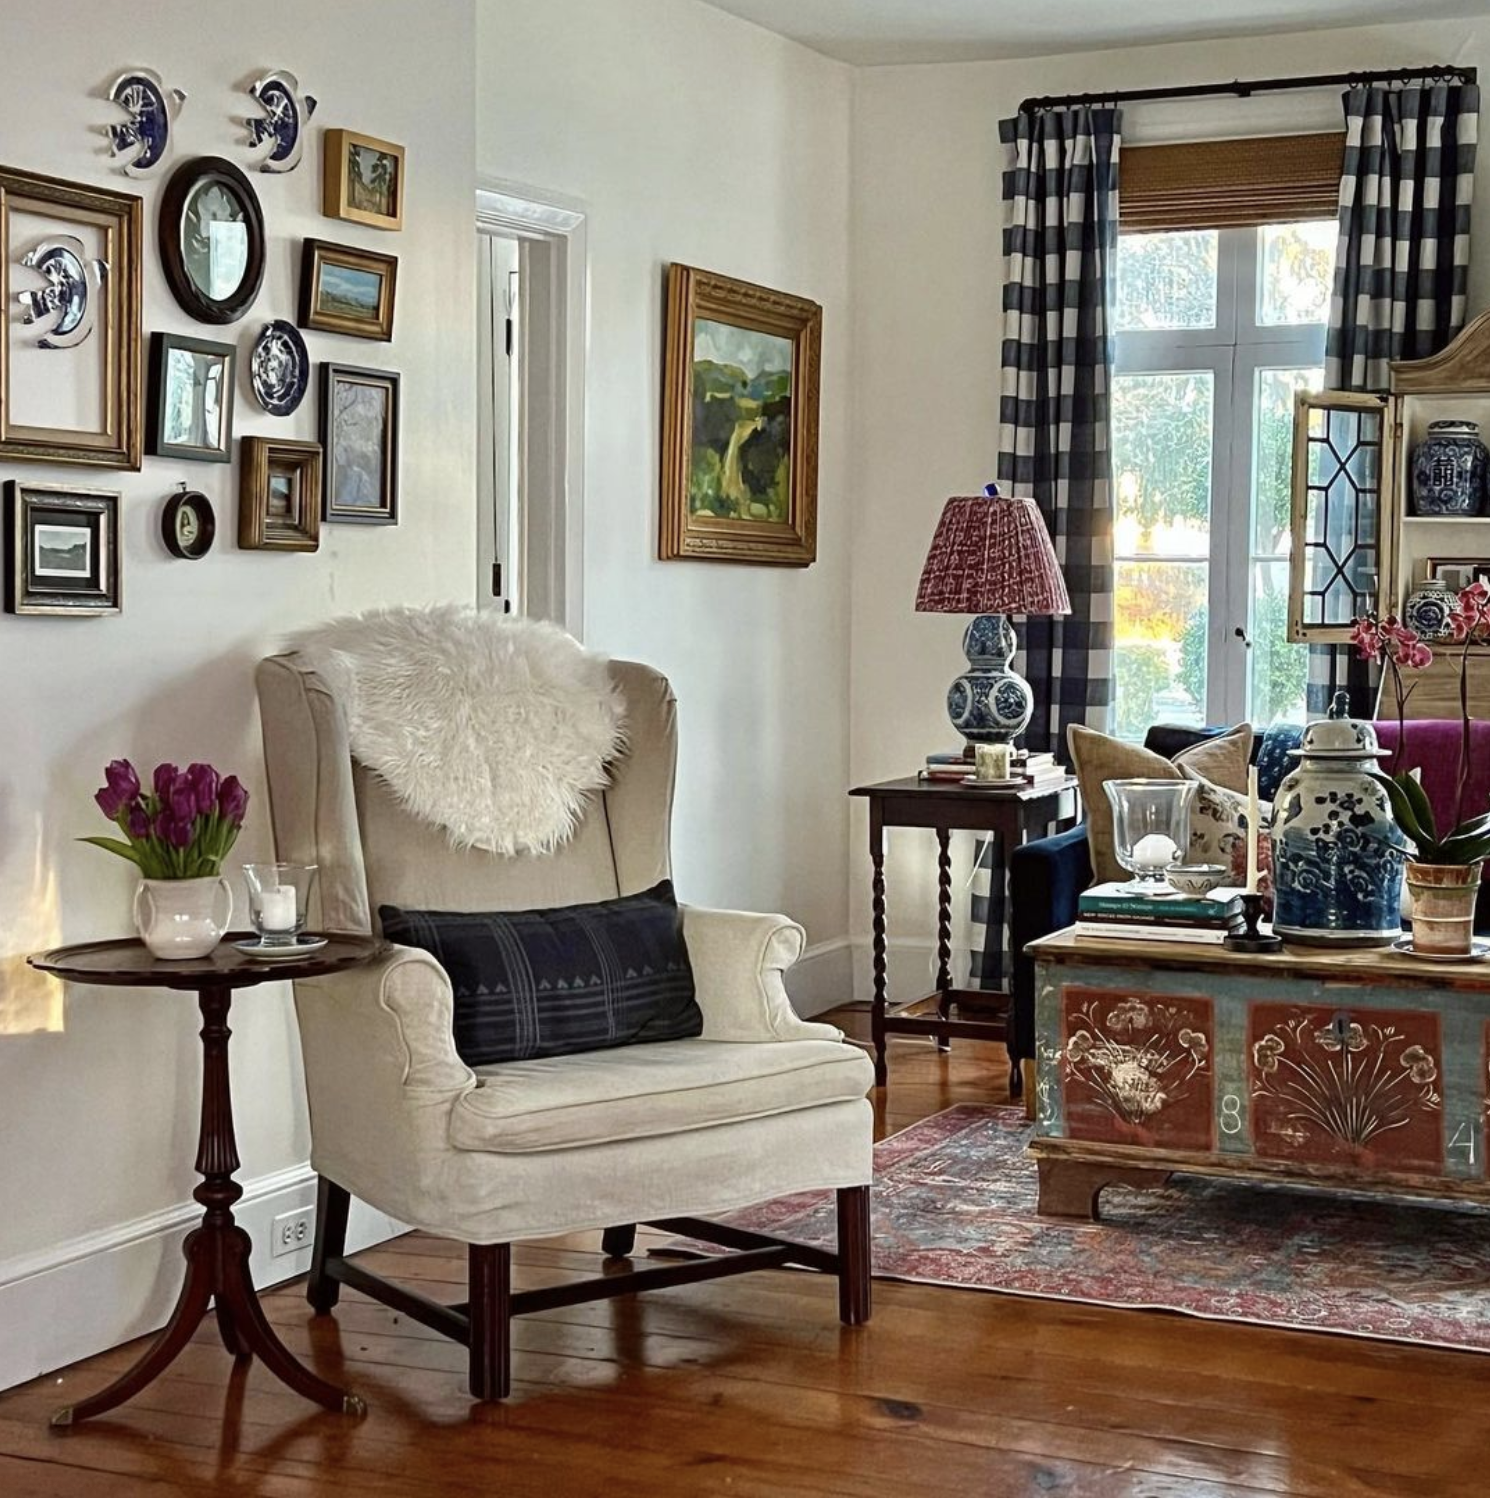 Eclectic home tour - love the gallery wall with plates and vintage art kellyelko.com